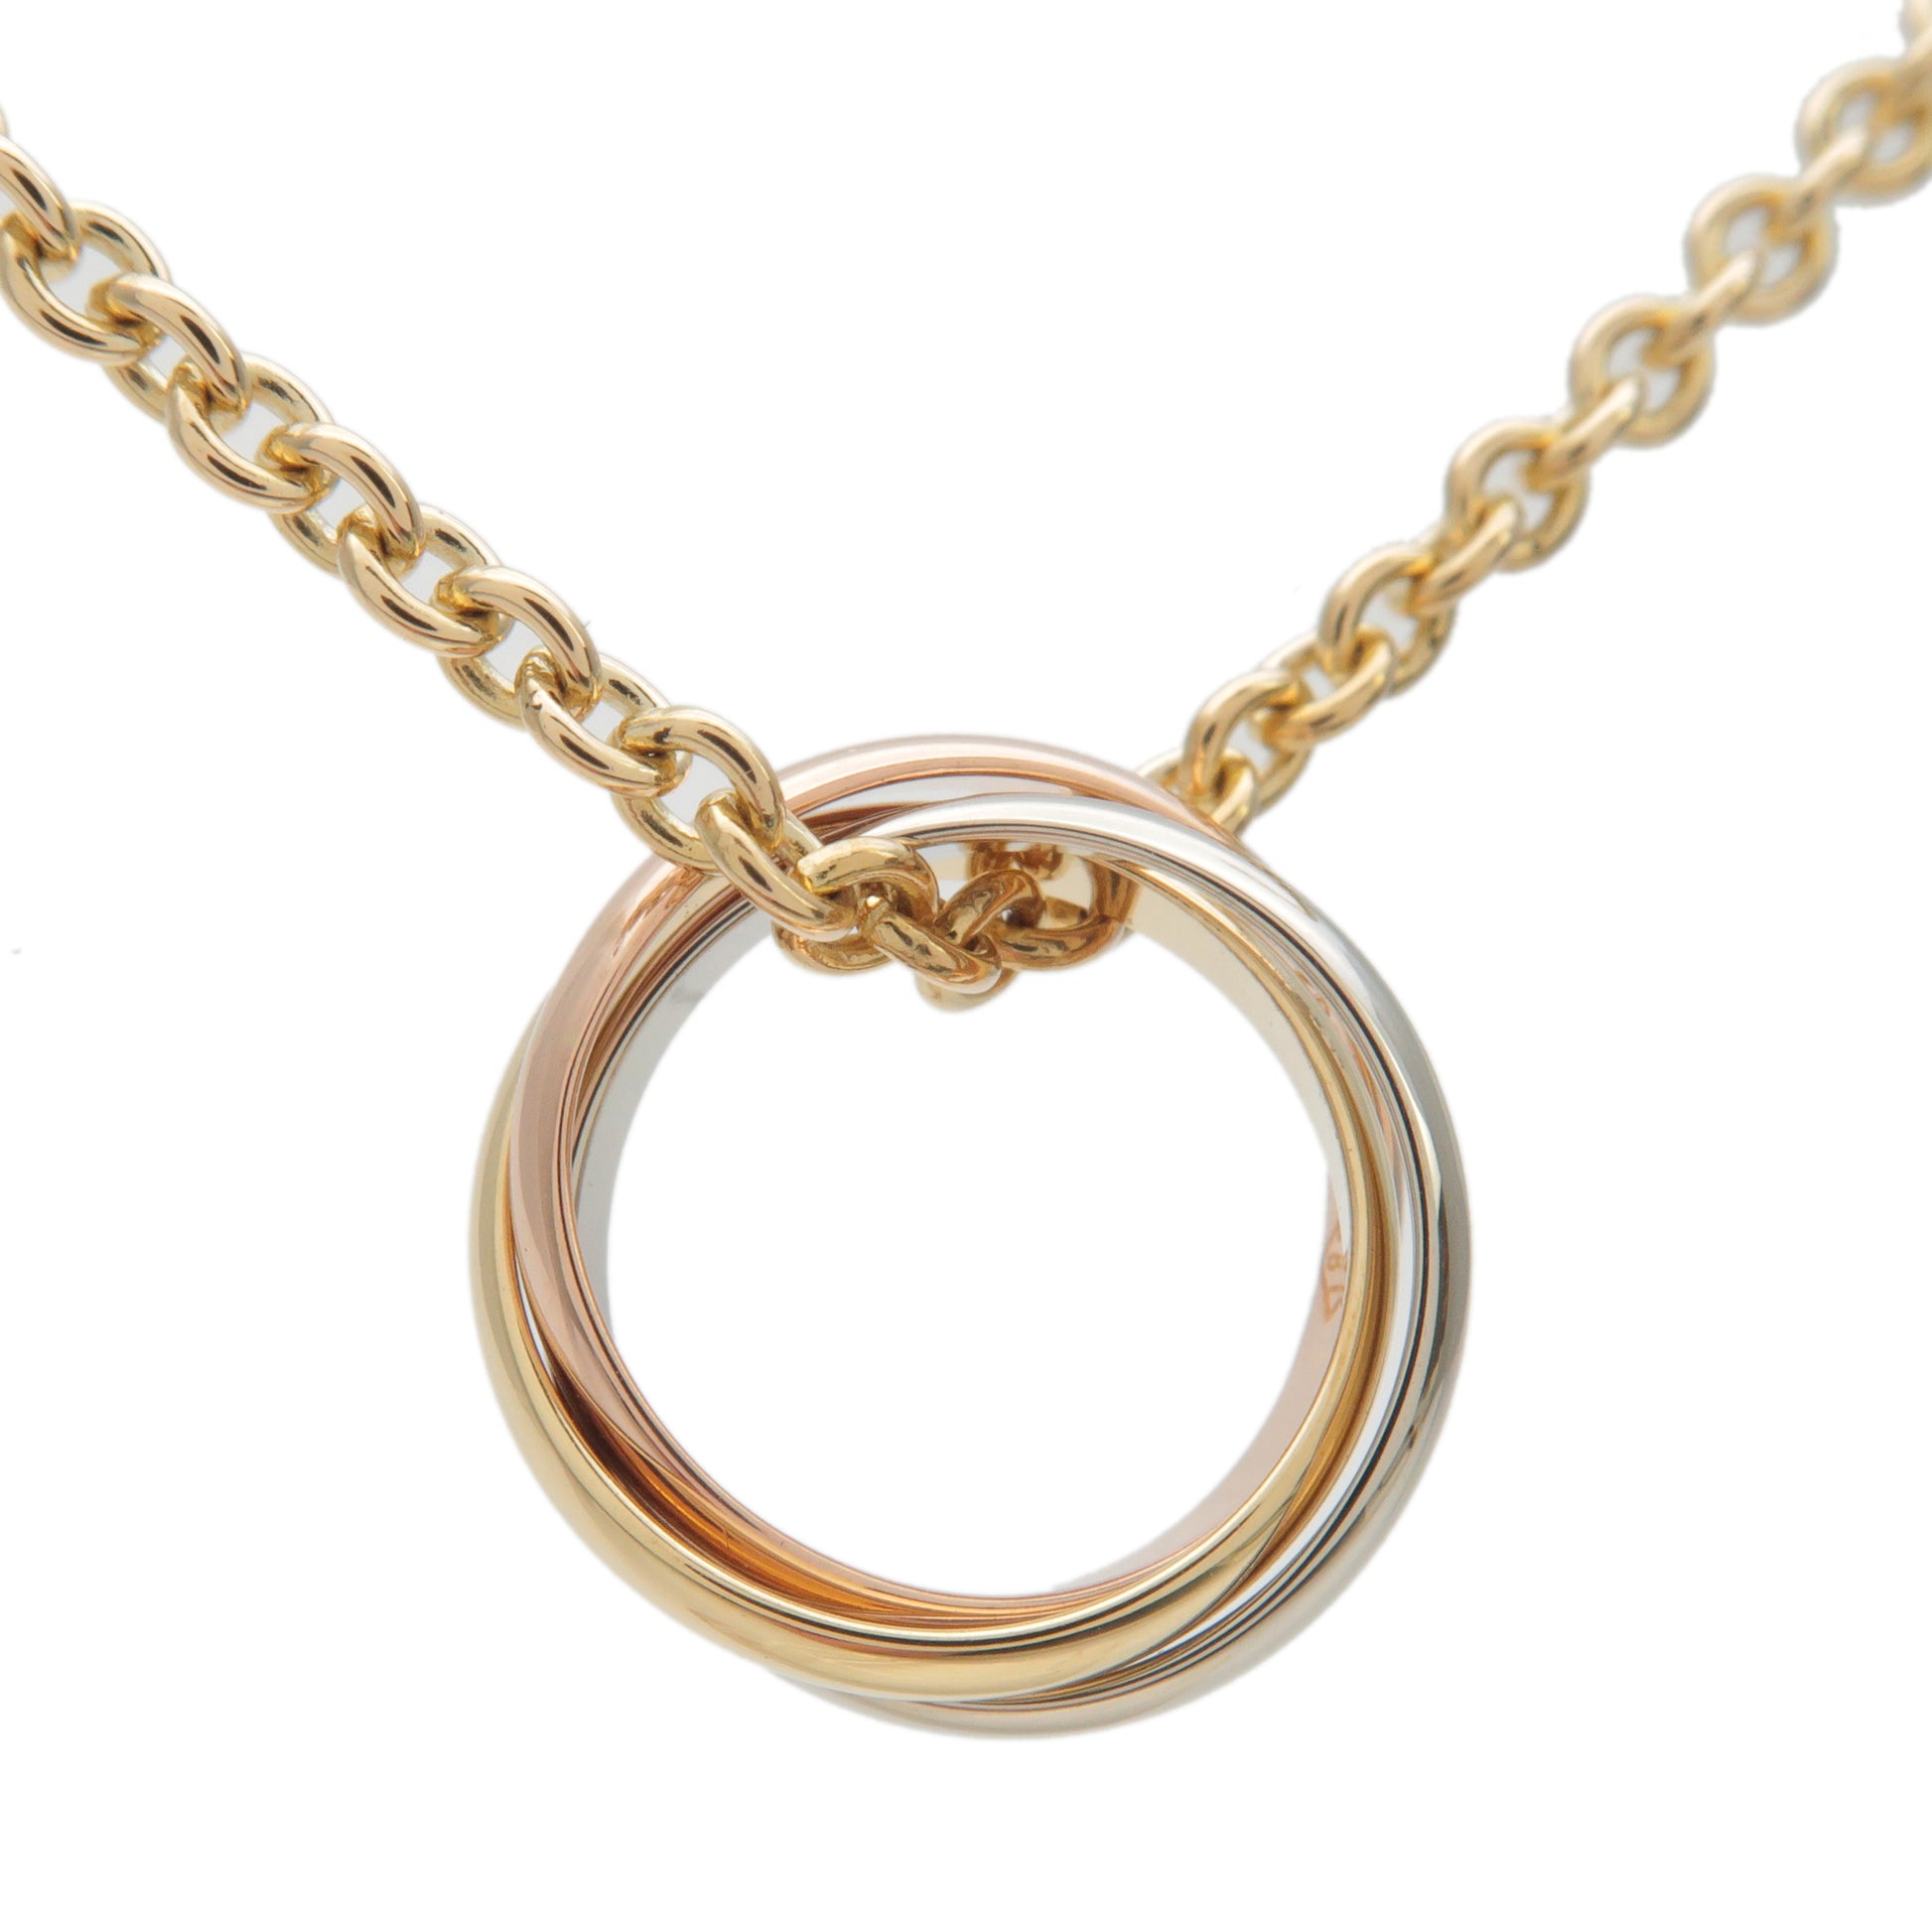 Cartier-Trinity-Necklace-K18-750-Yellow/White/Rose-Gold